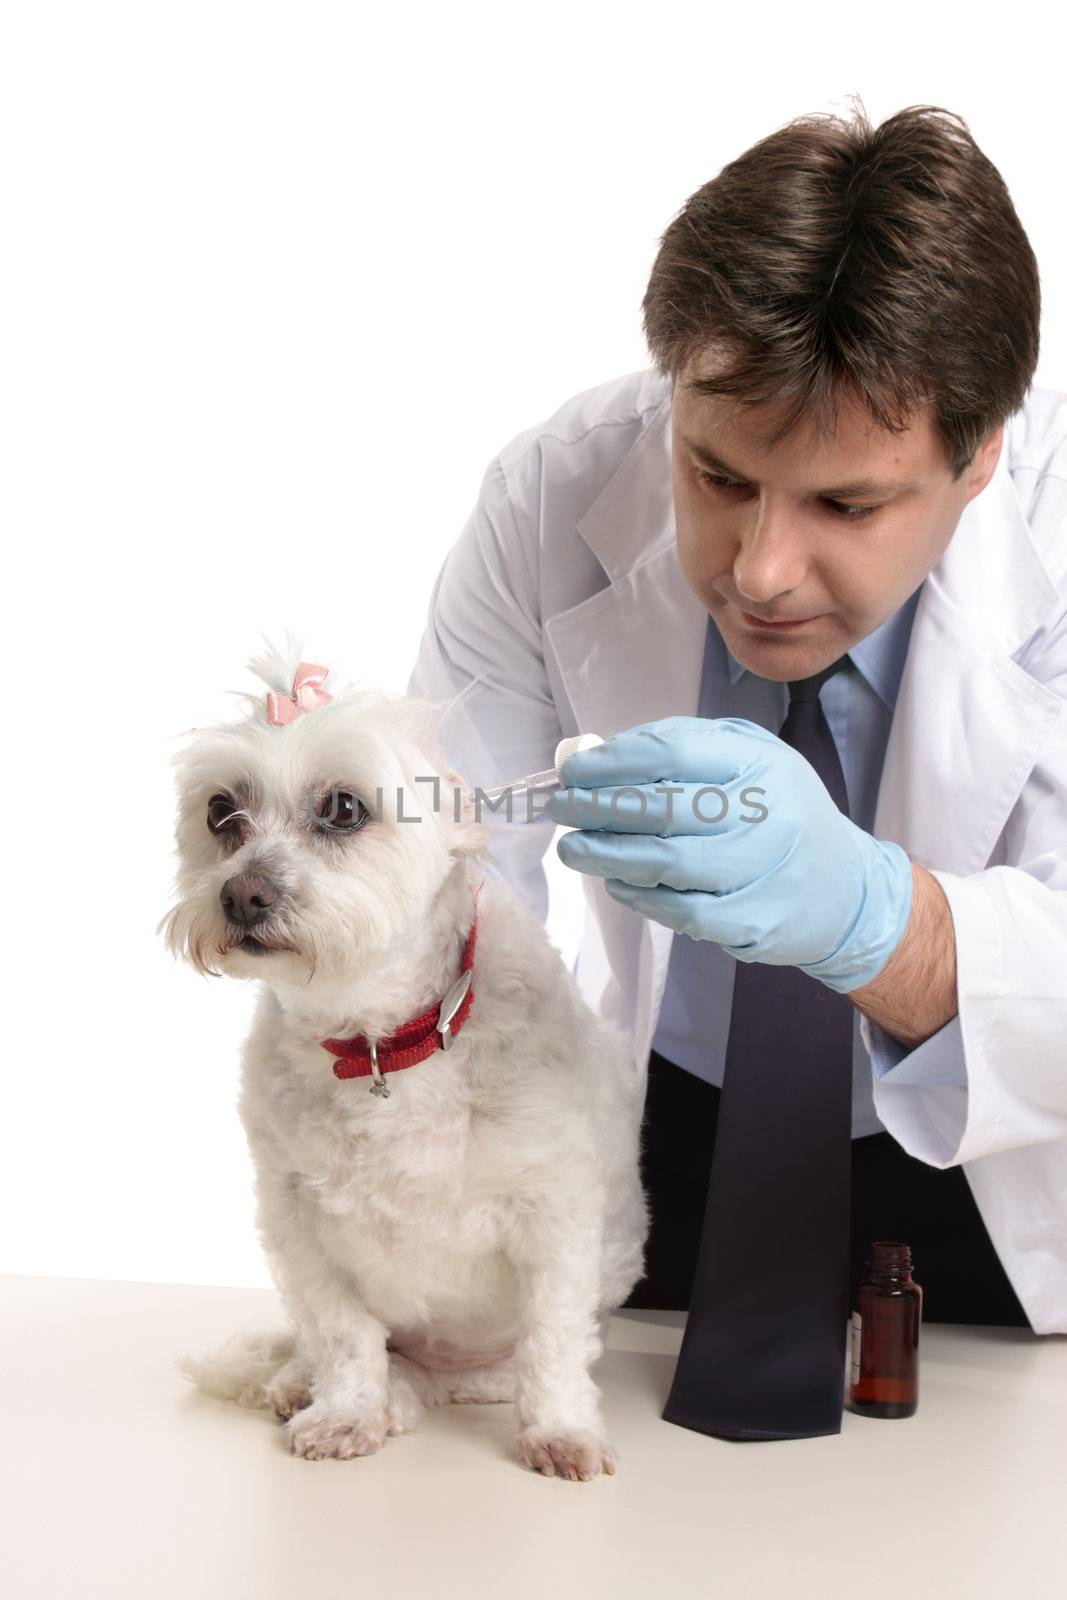 A vet puts some medicated drops into a pet dogs ear.  Focus to dog